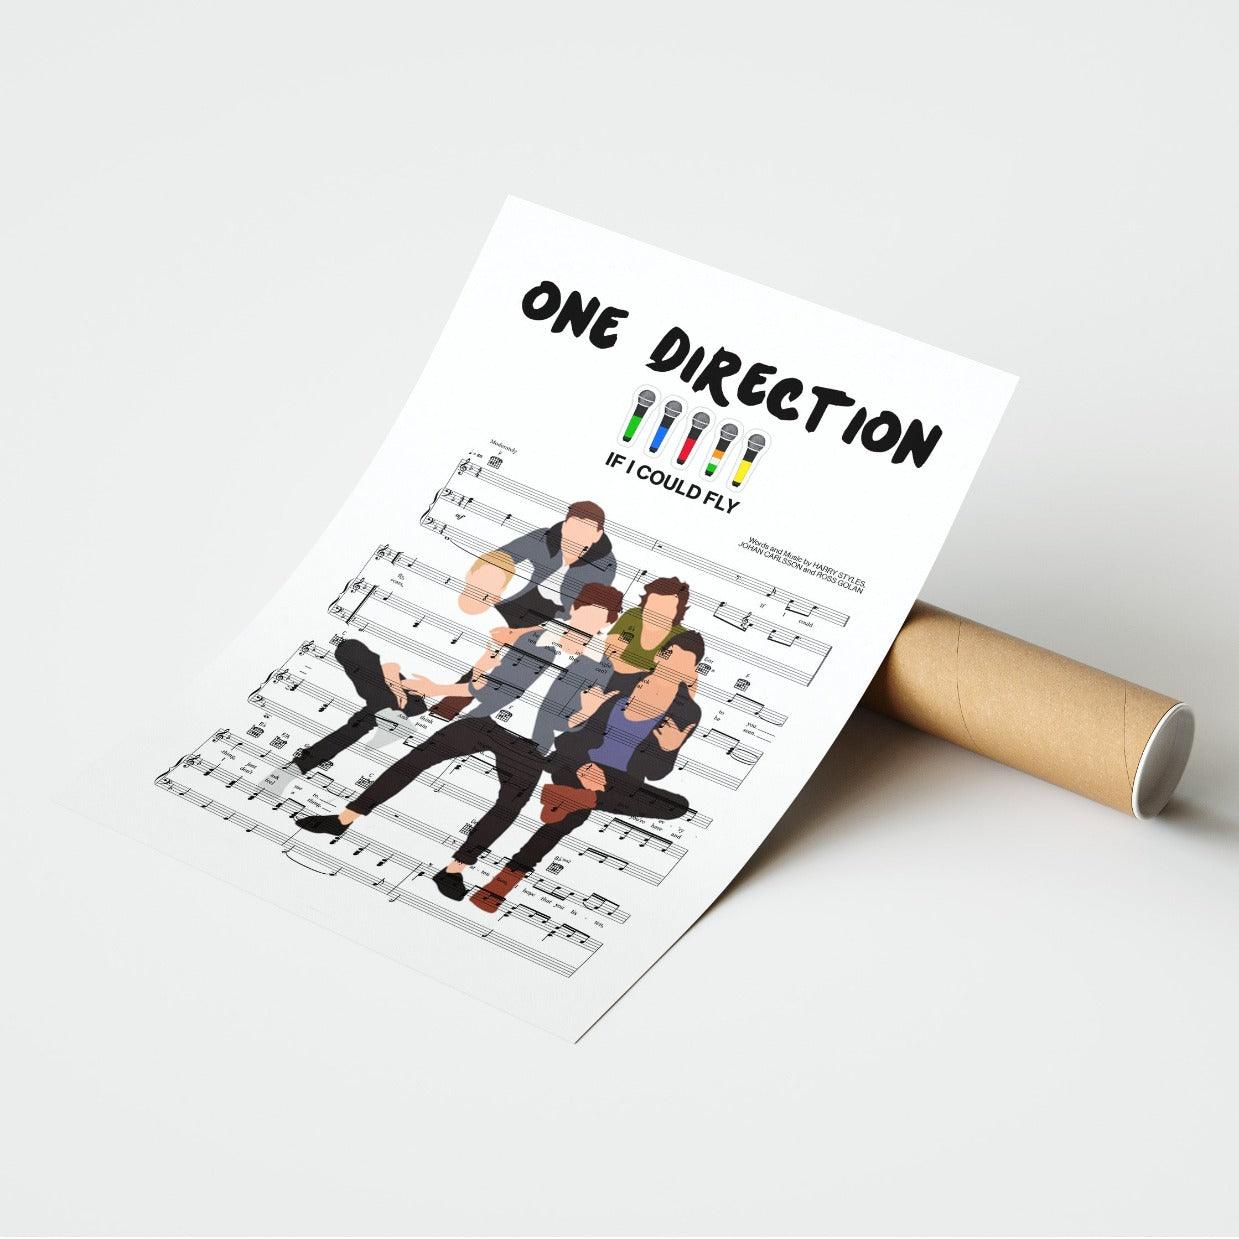 Our One Direction - IF I COULD FLY Poster is the perfect way to show your love for the band. This poster is printed on high quality paper and is perfect for hanging in dorms, bedrooms, or anywhere blank walls.